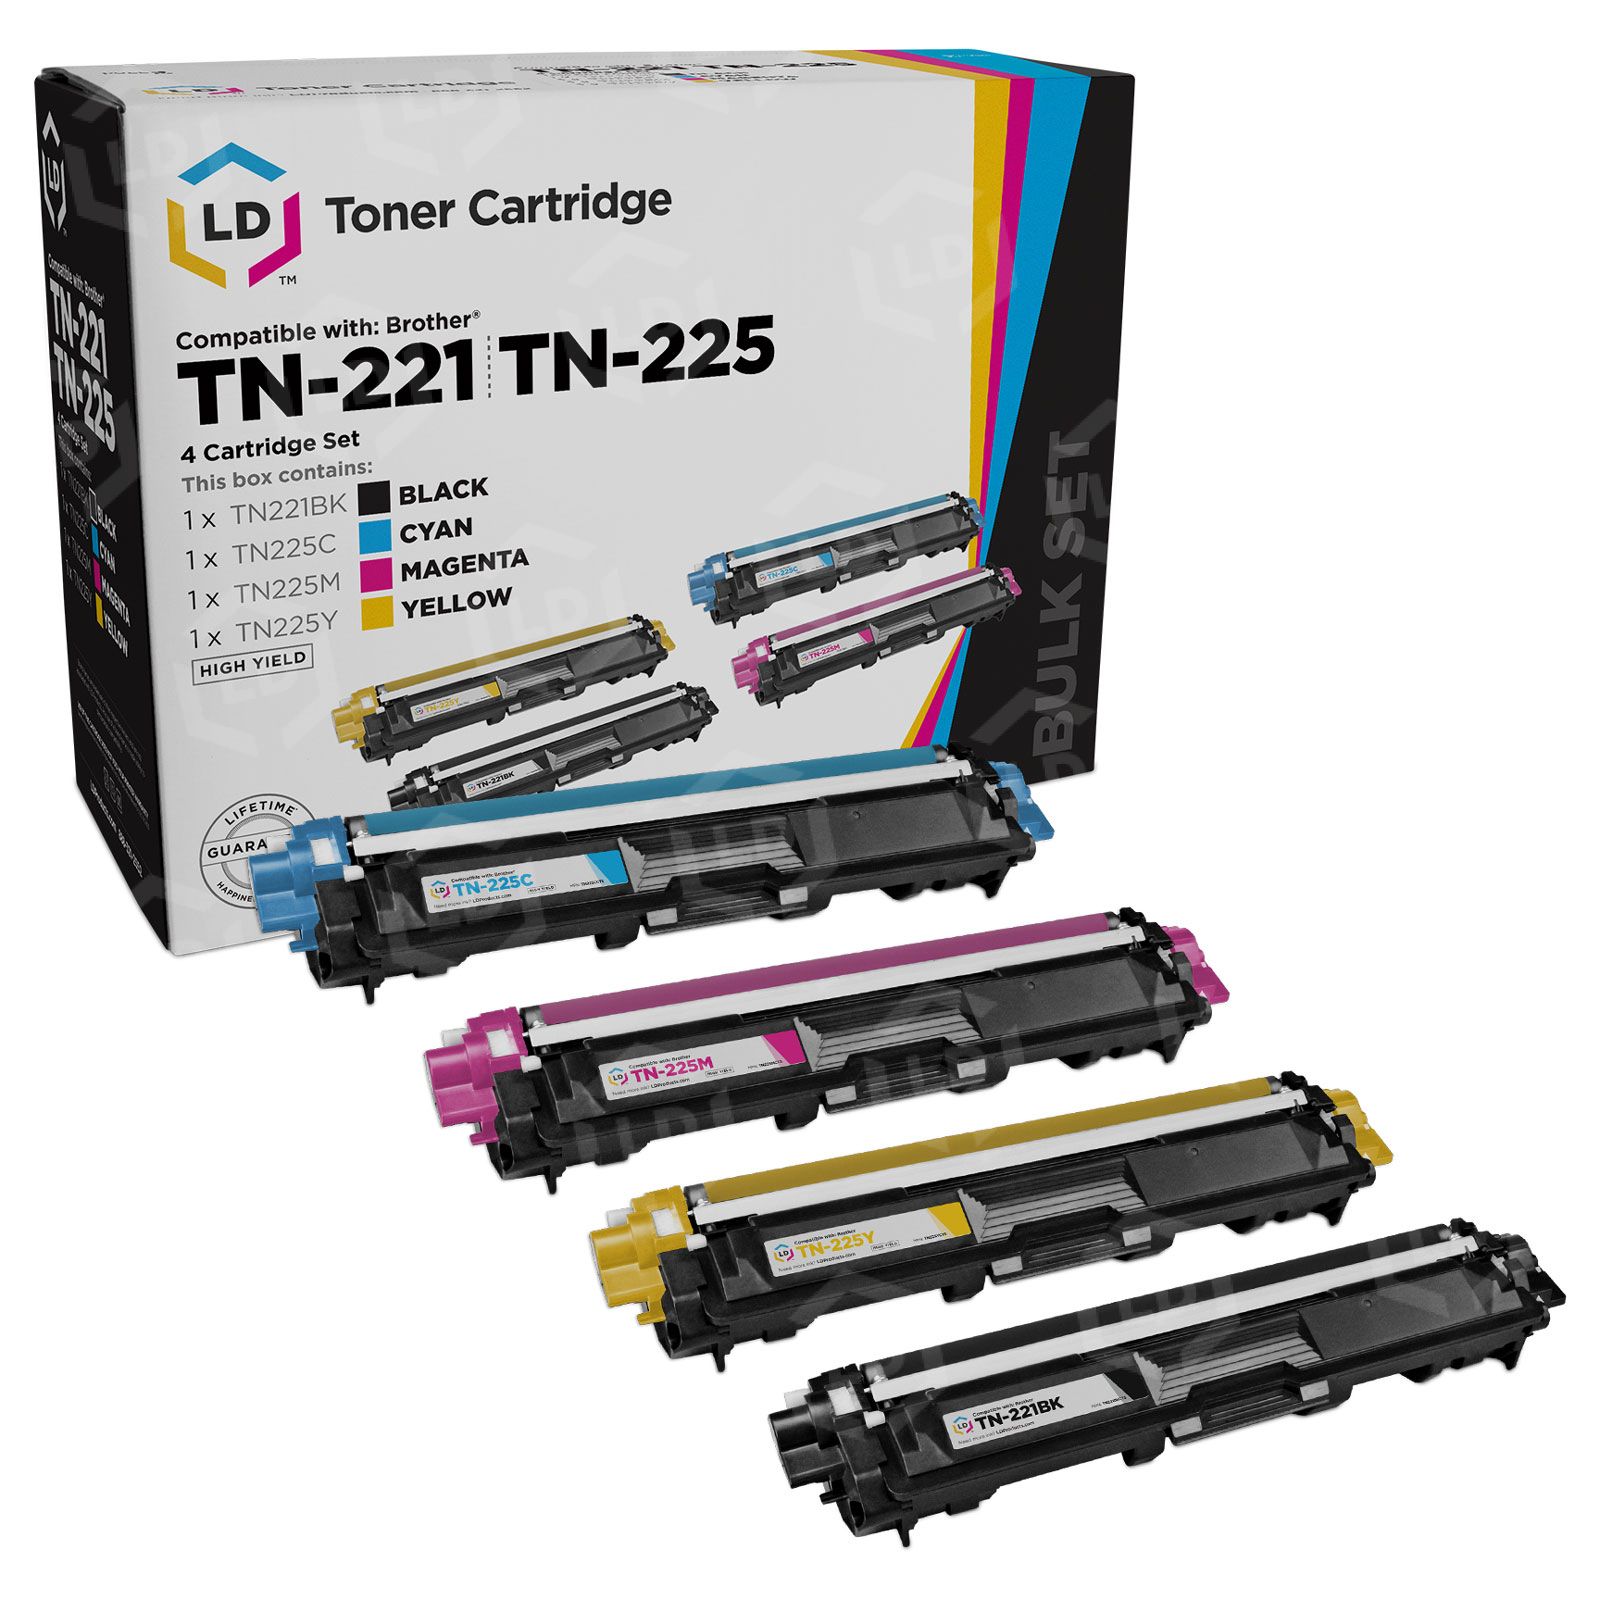 10PK TN225 Color Toner for Brother TN221 DCP-9020CDW India